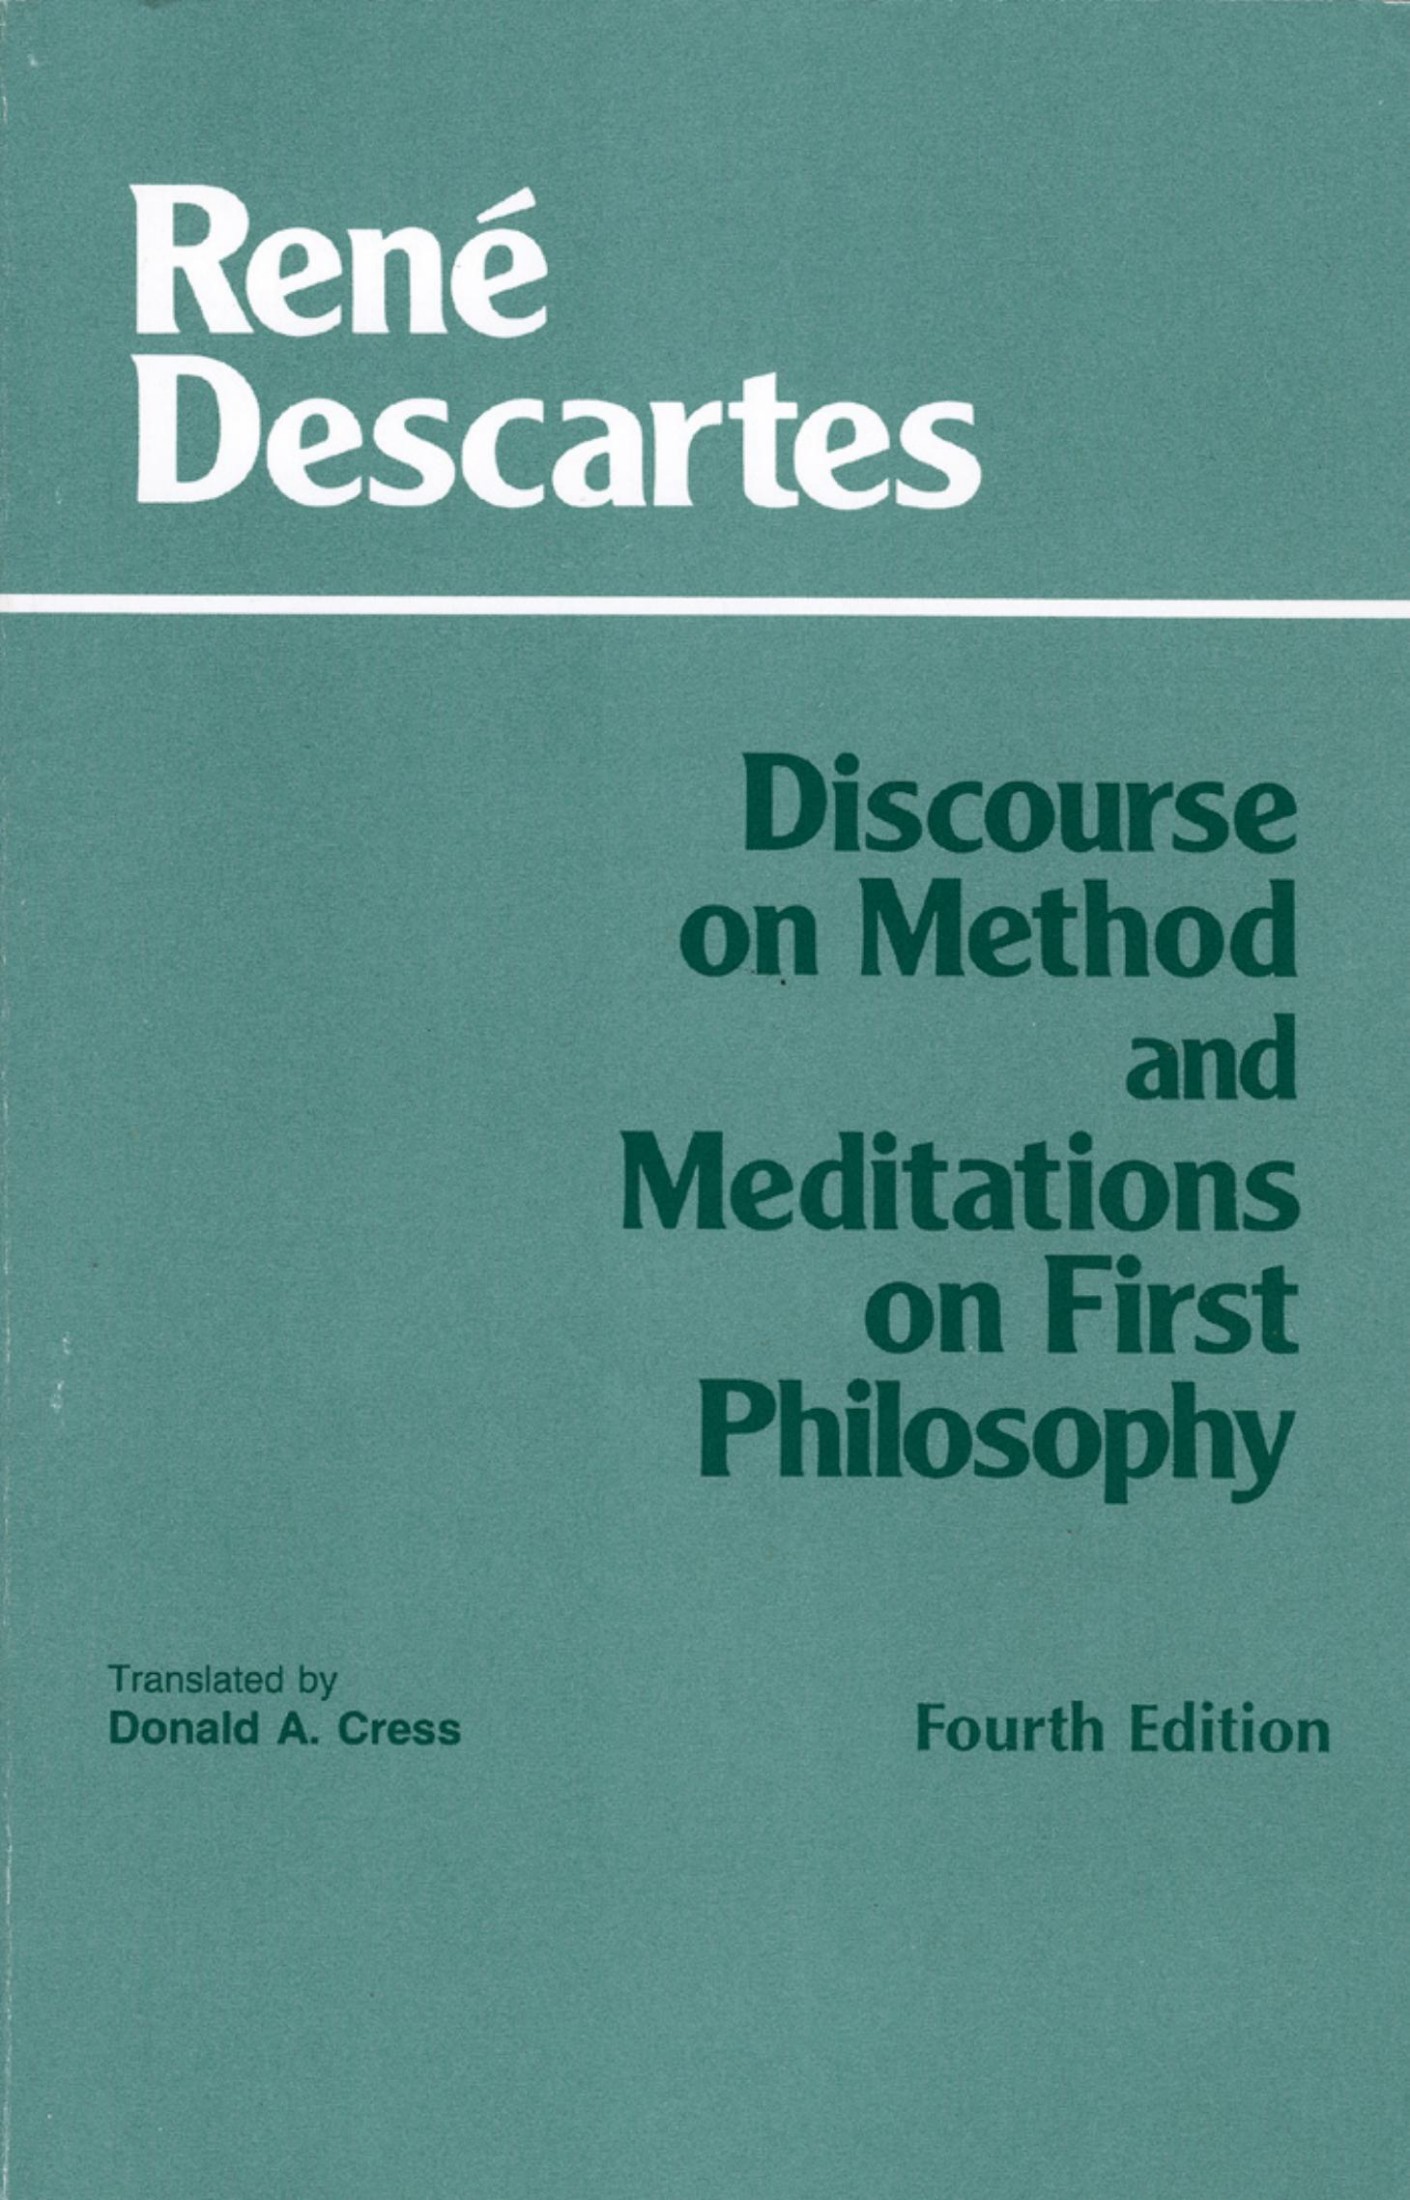 Discourse on Method ; Meditations on First Philosophy